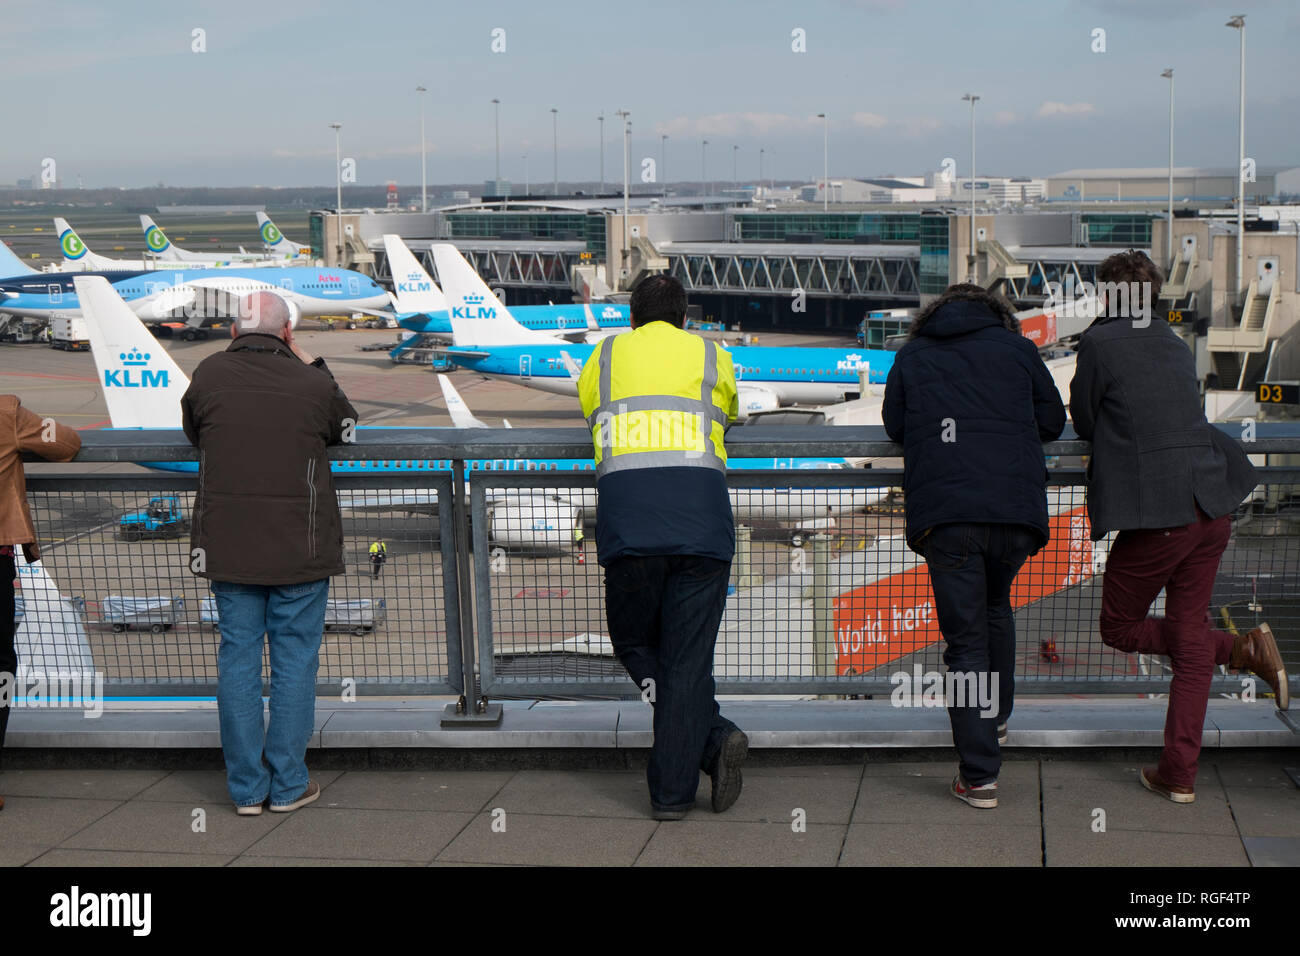 At the plane observation deck at Schiphol airport in Amsterdam in the Netherlands. People watching KLM planes take off. Stock Photo